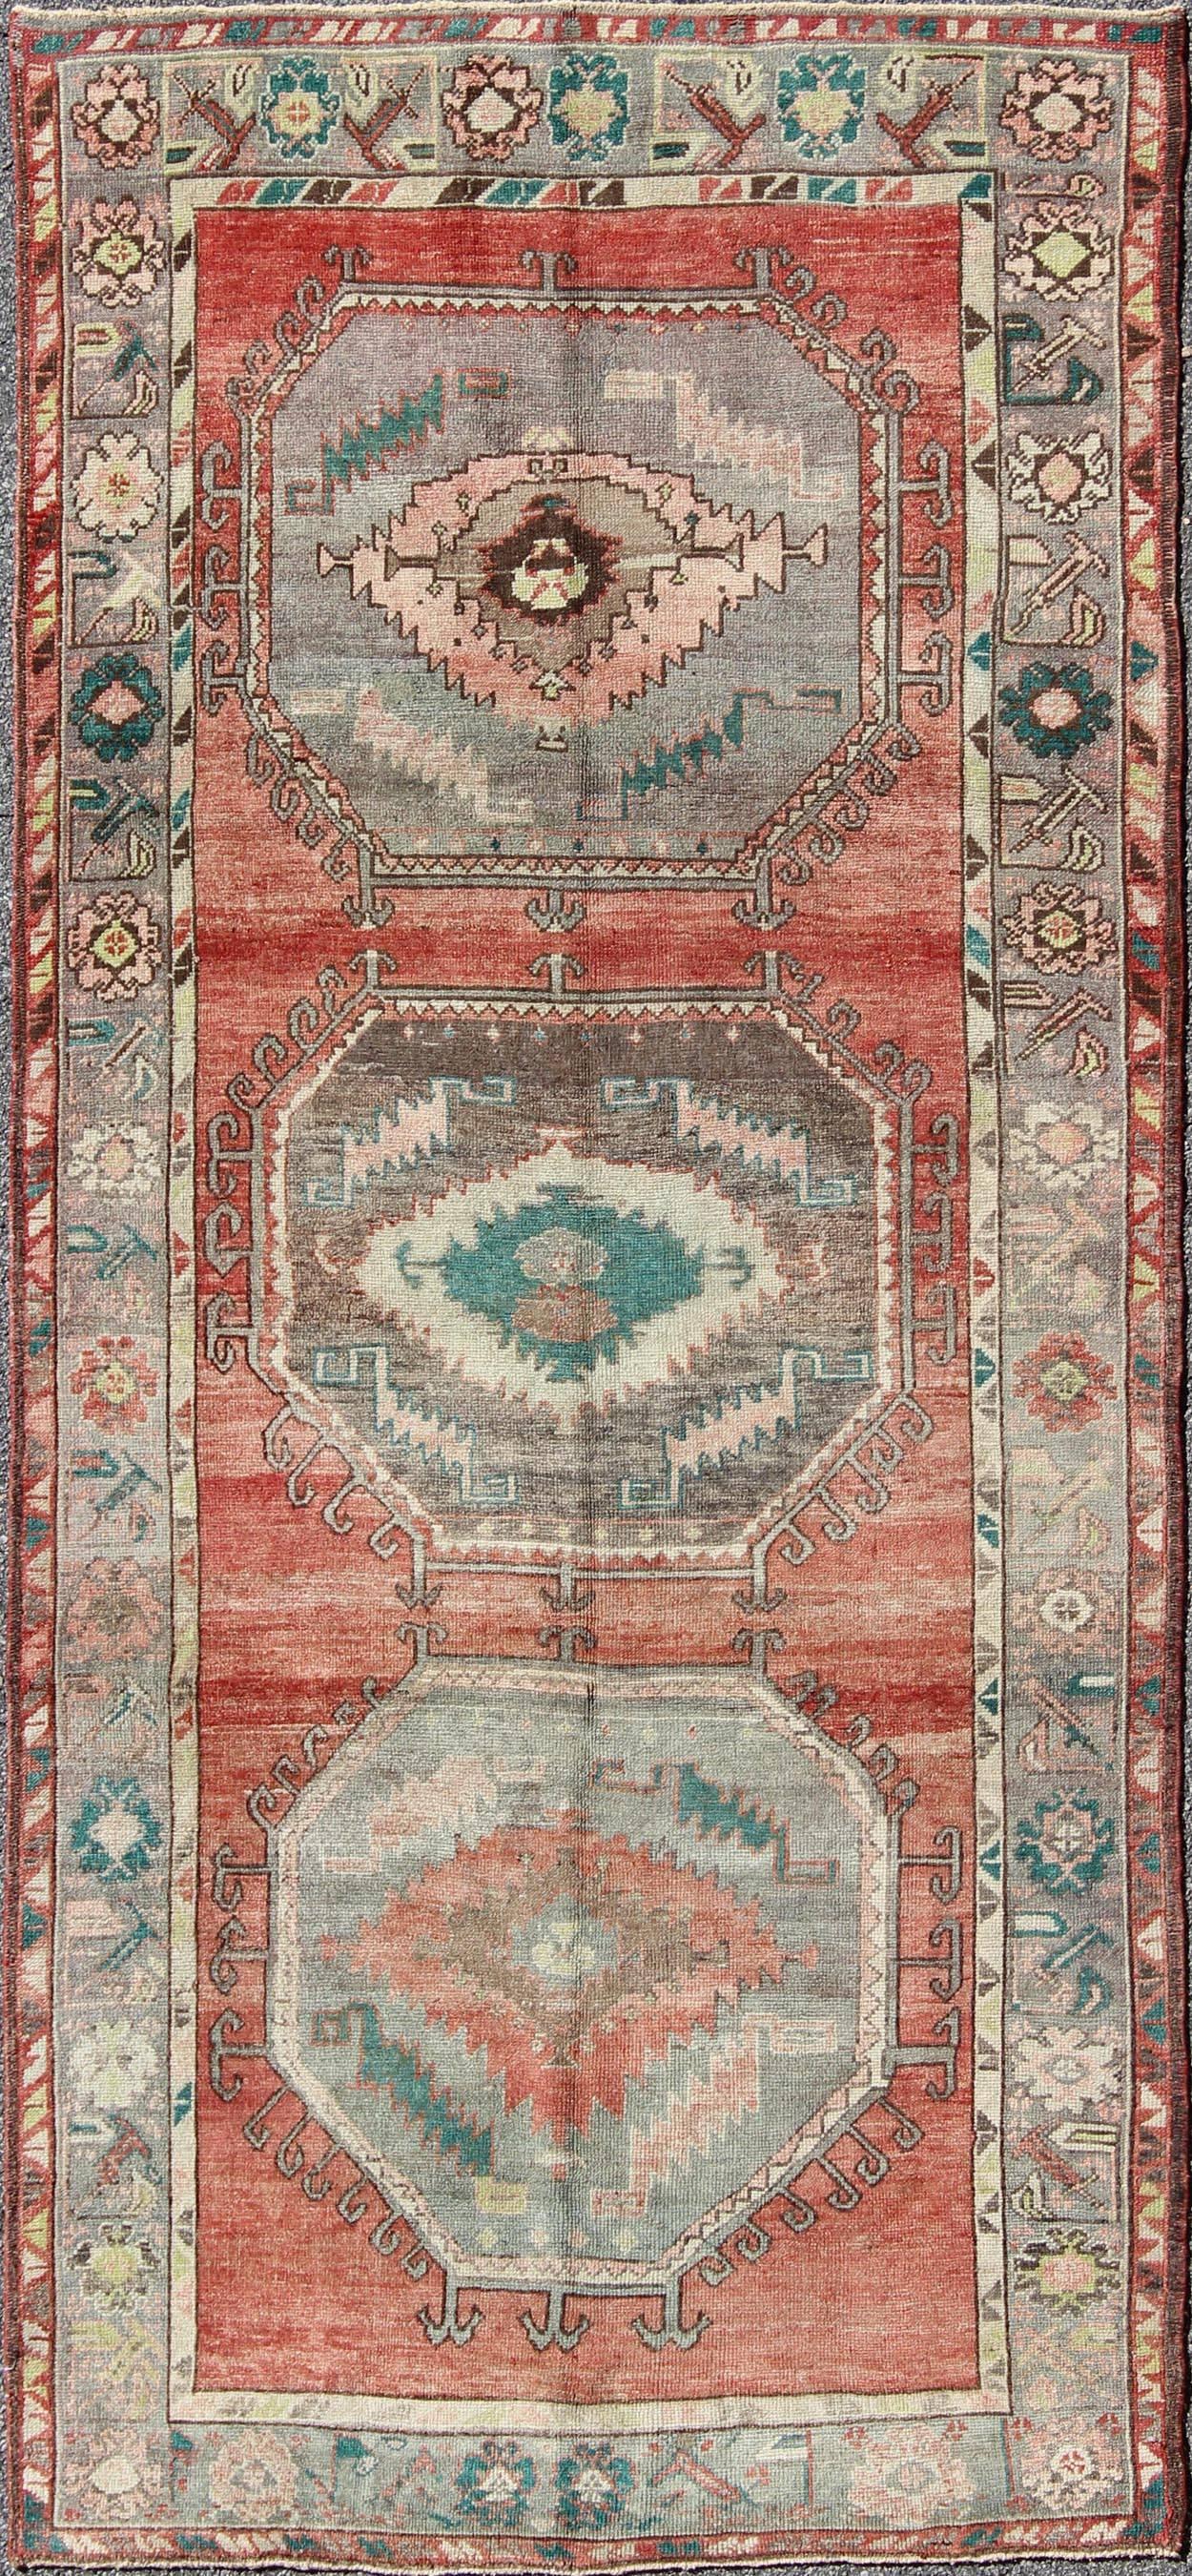 This Oushak gallery runner displays archetypal Oushak craftsmanship with a lovely color scheme including subtle tones of coral, taupe, beige, soft green, light teal and purple, which are highlighted by chocolate and mocha colors. The stylized center